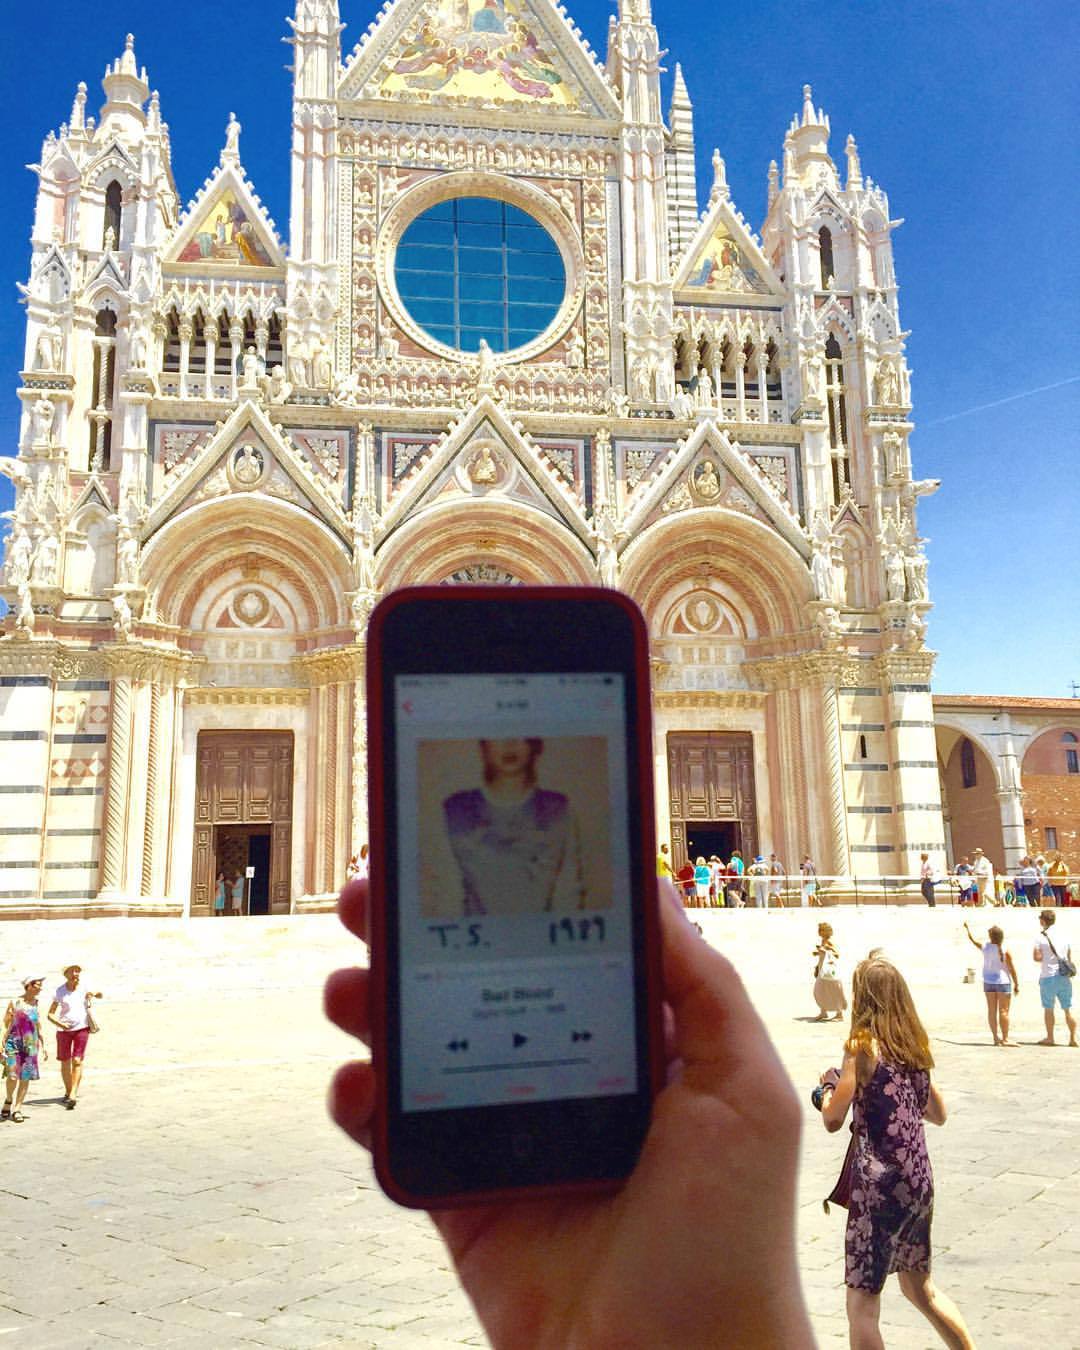 I duomo about you, but I’m feelin’ 22 ⛪️🕌 Place 396: Il Duomo si Siena! Thanks so much @sweetsarahstone! @taylorswift #taylorswift #taylurking #1989 #1989places (presso Siena Cathedral)